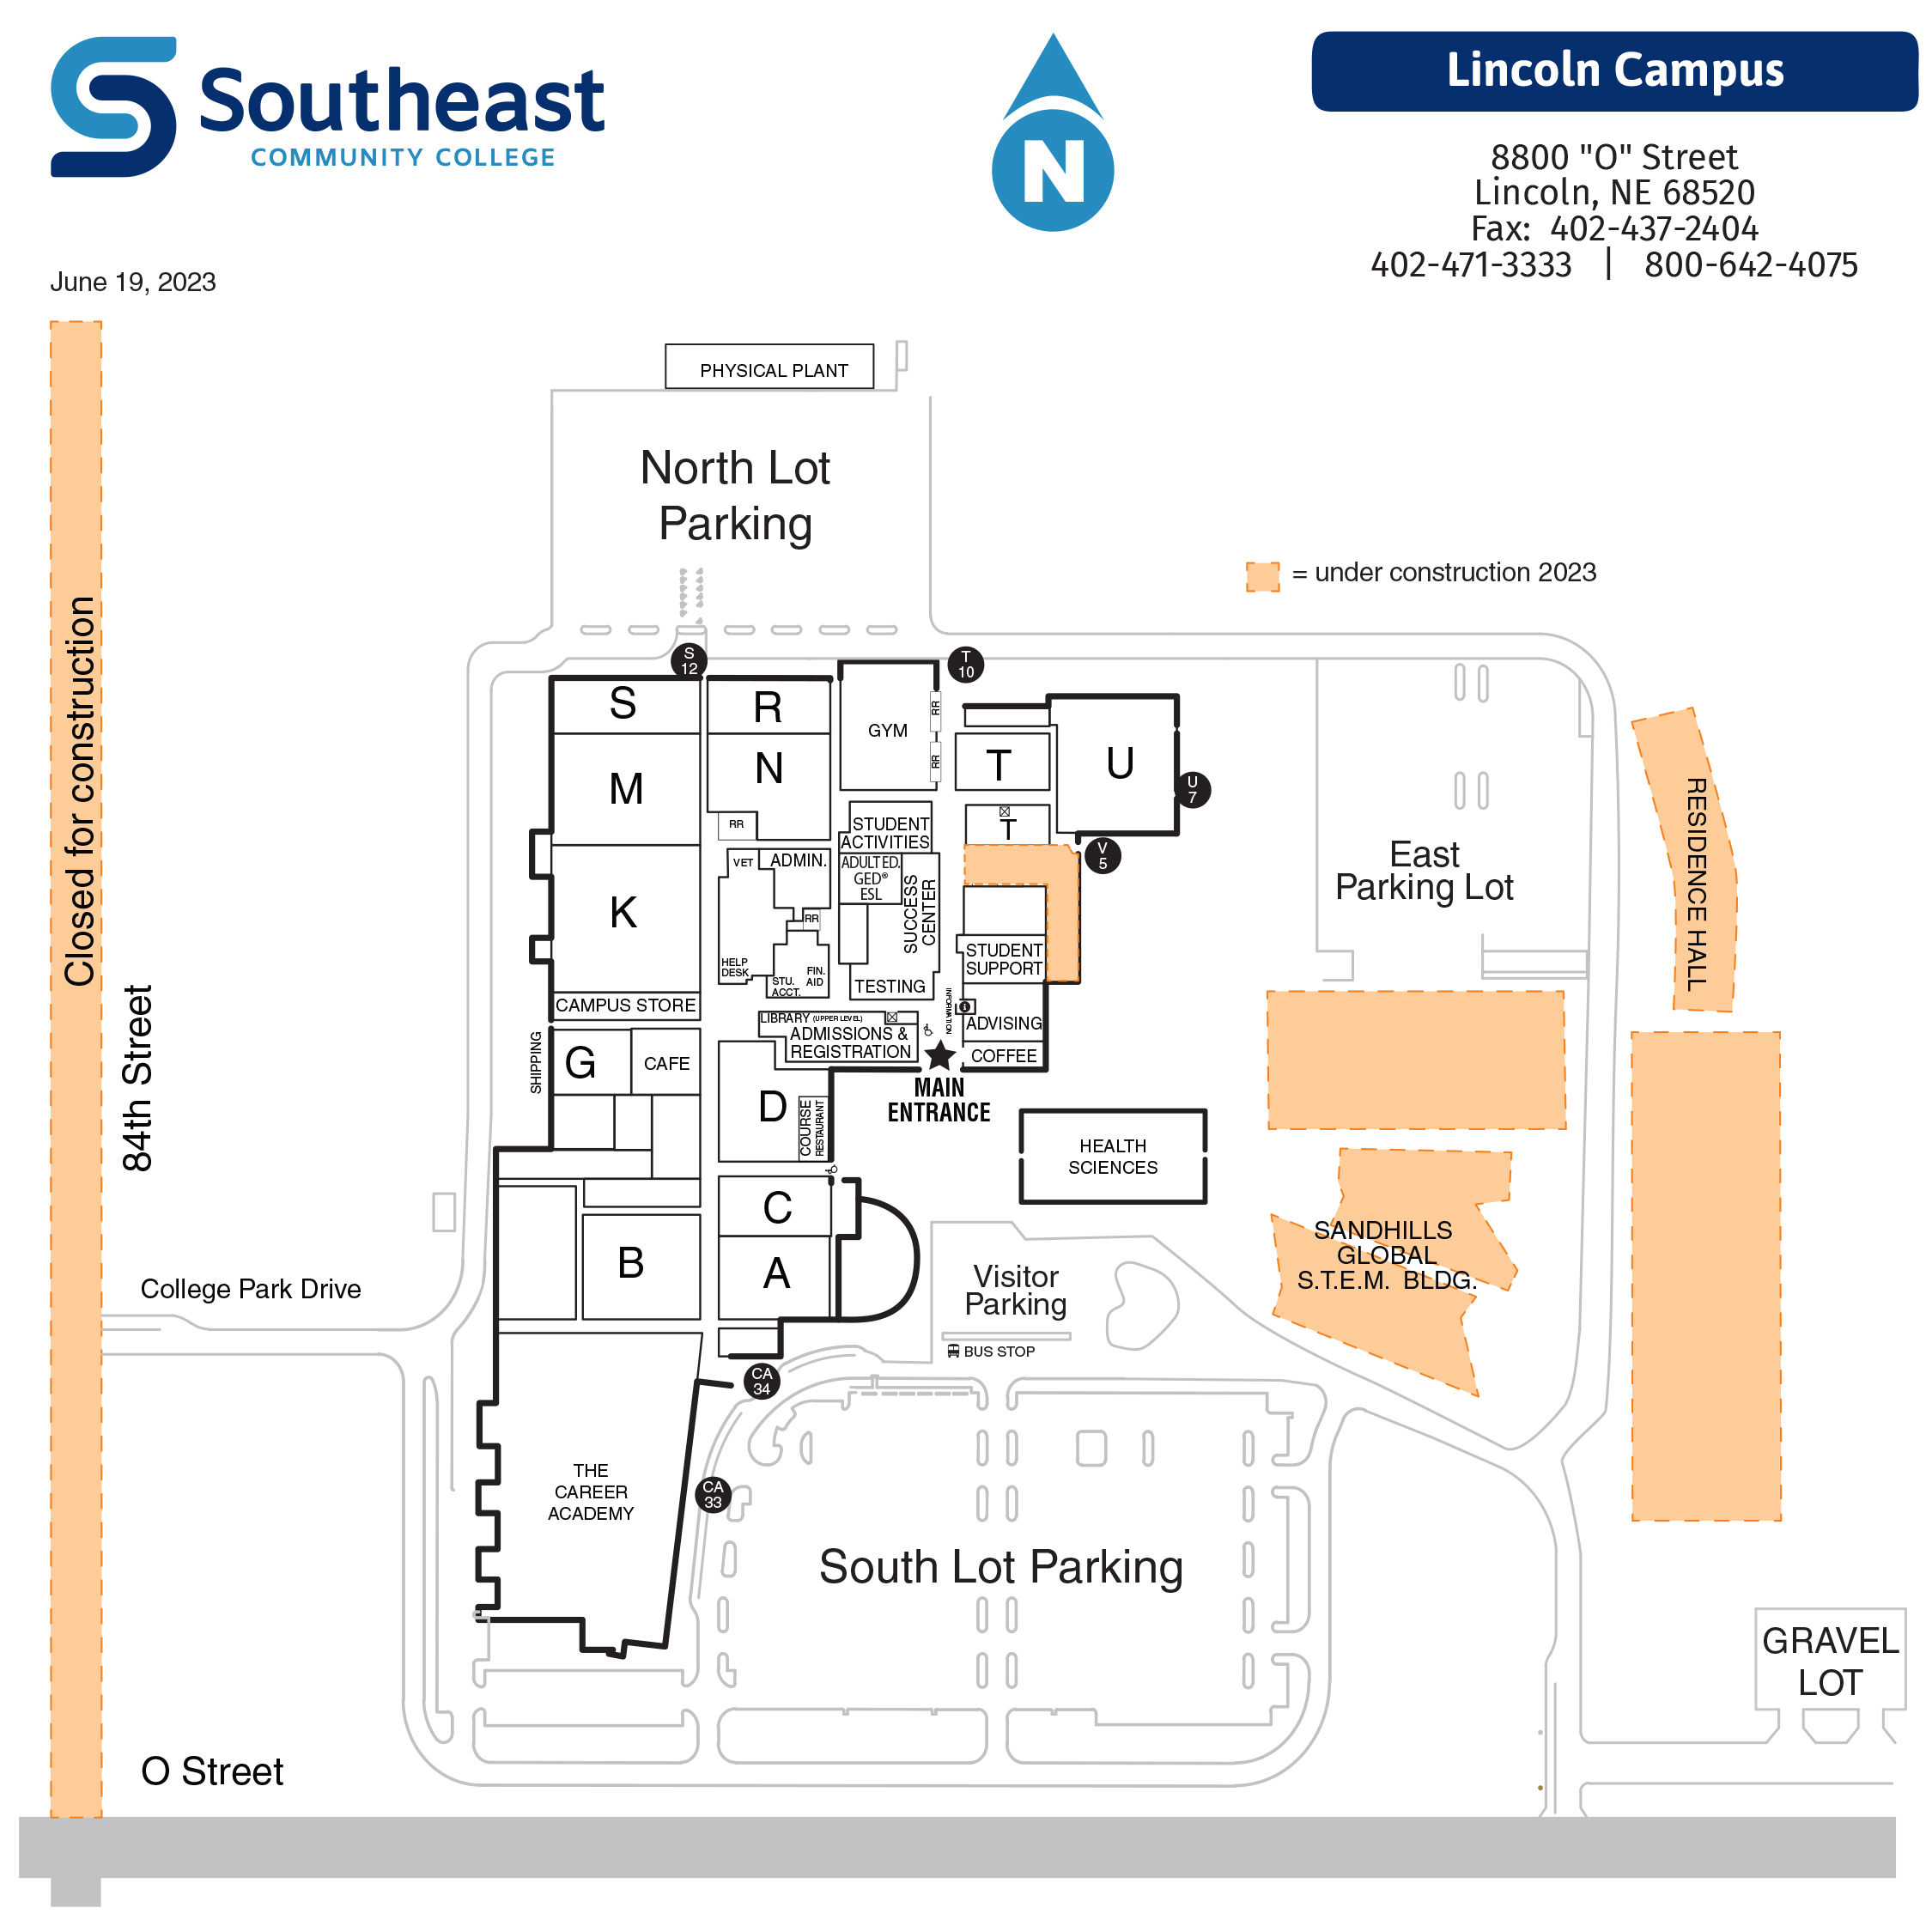 Lincoln campus street map